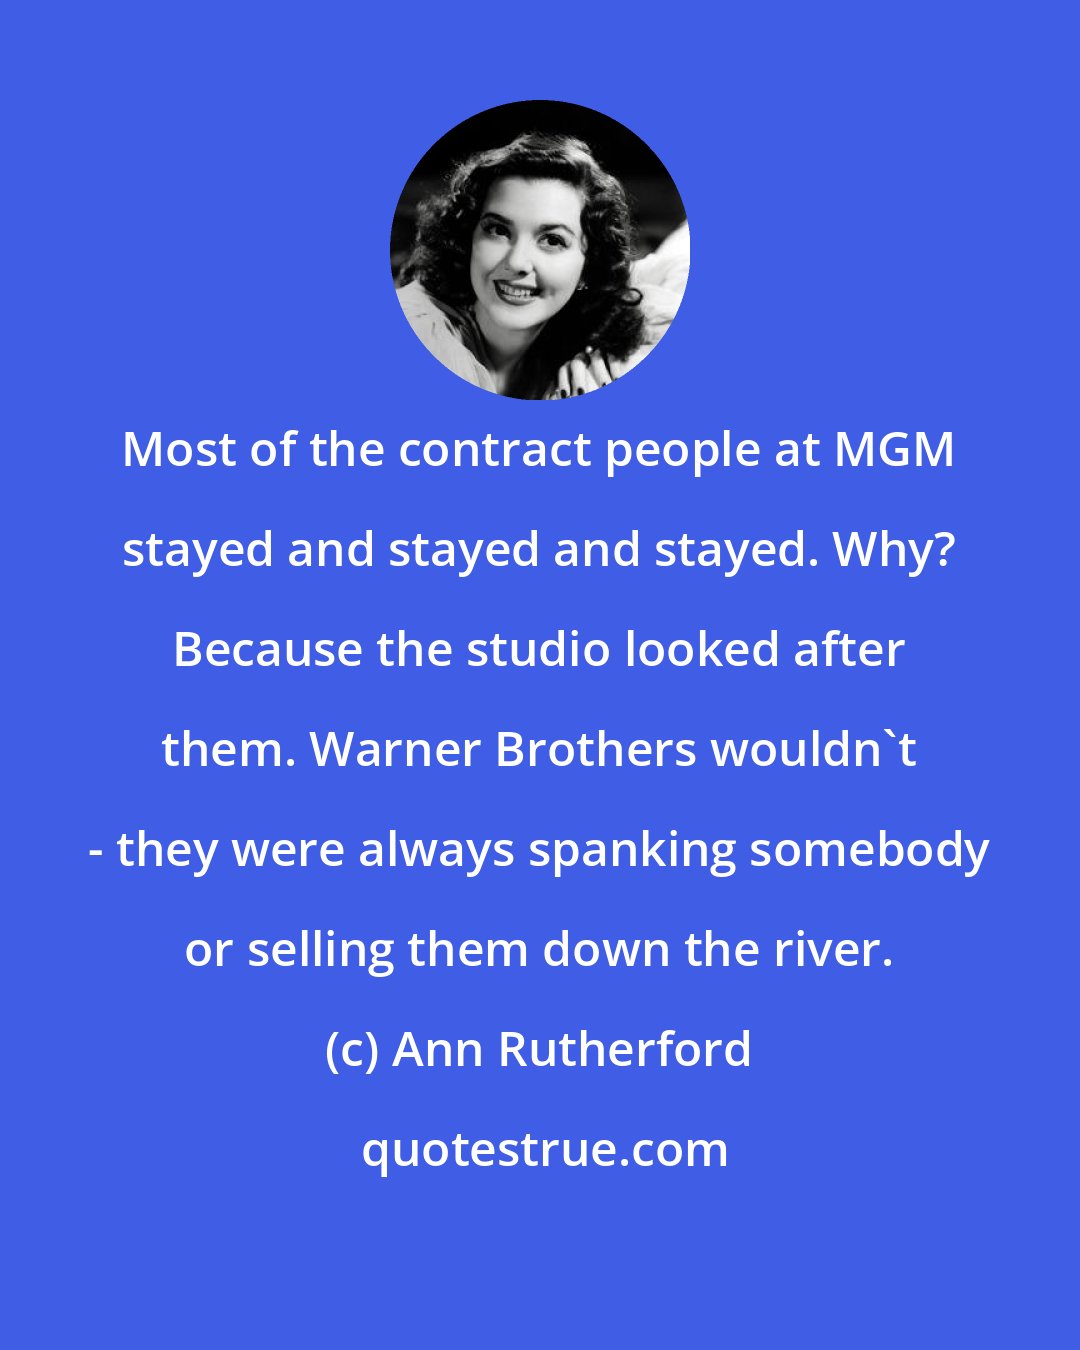 Ann Rutherford: Most of the contract people at MGM stayed and stayed and stayed. Why? Because the studio looked after them. Warner Brothers wouldn't - they were always spanking somebody or selling them down the river.